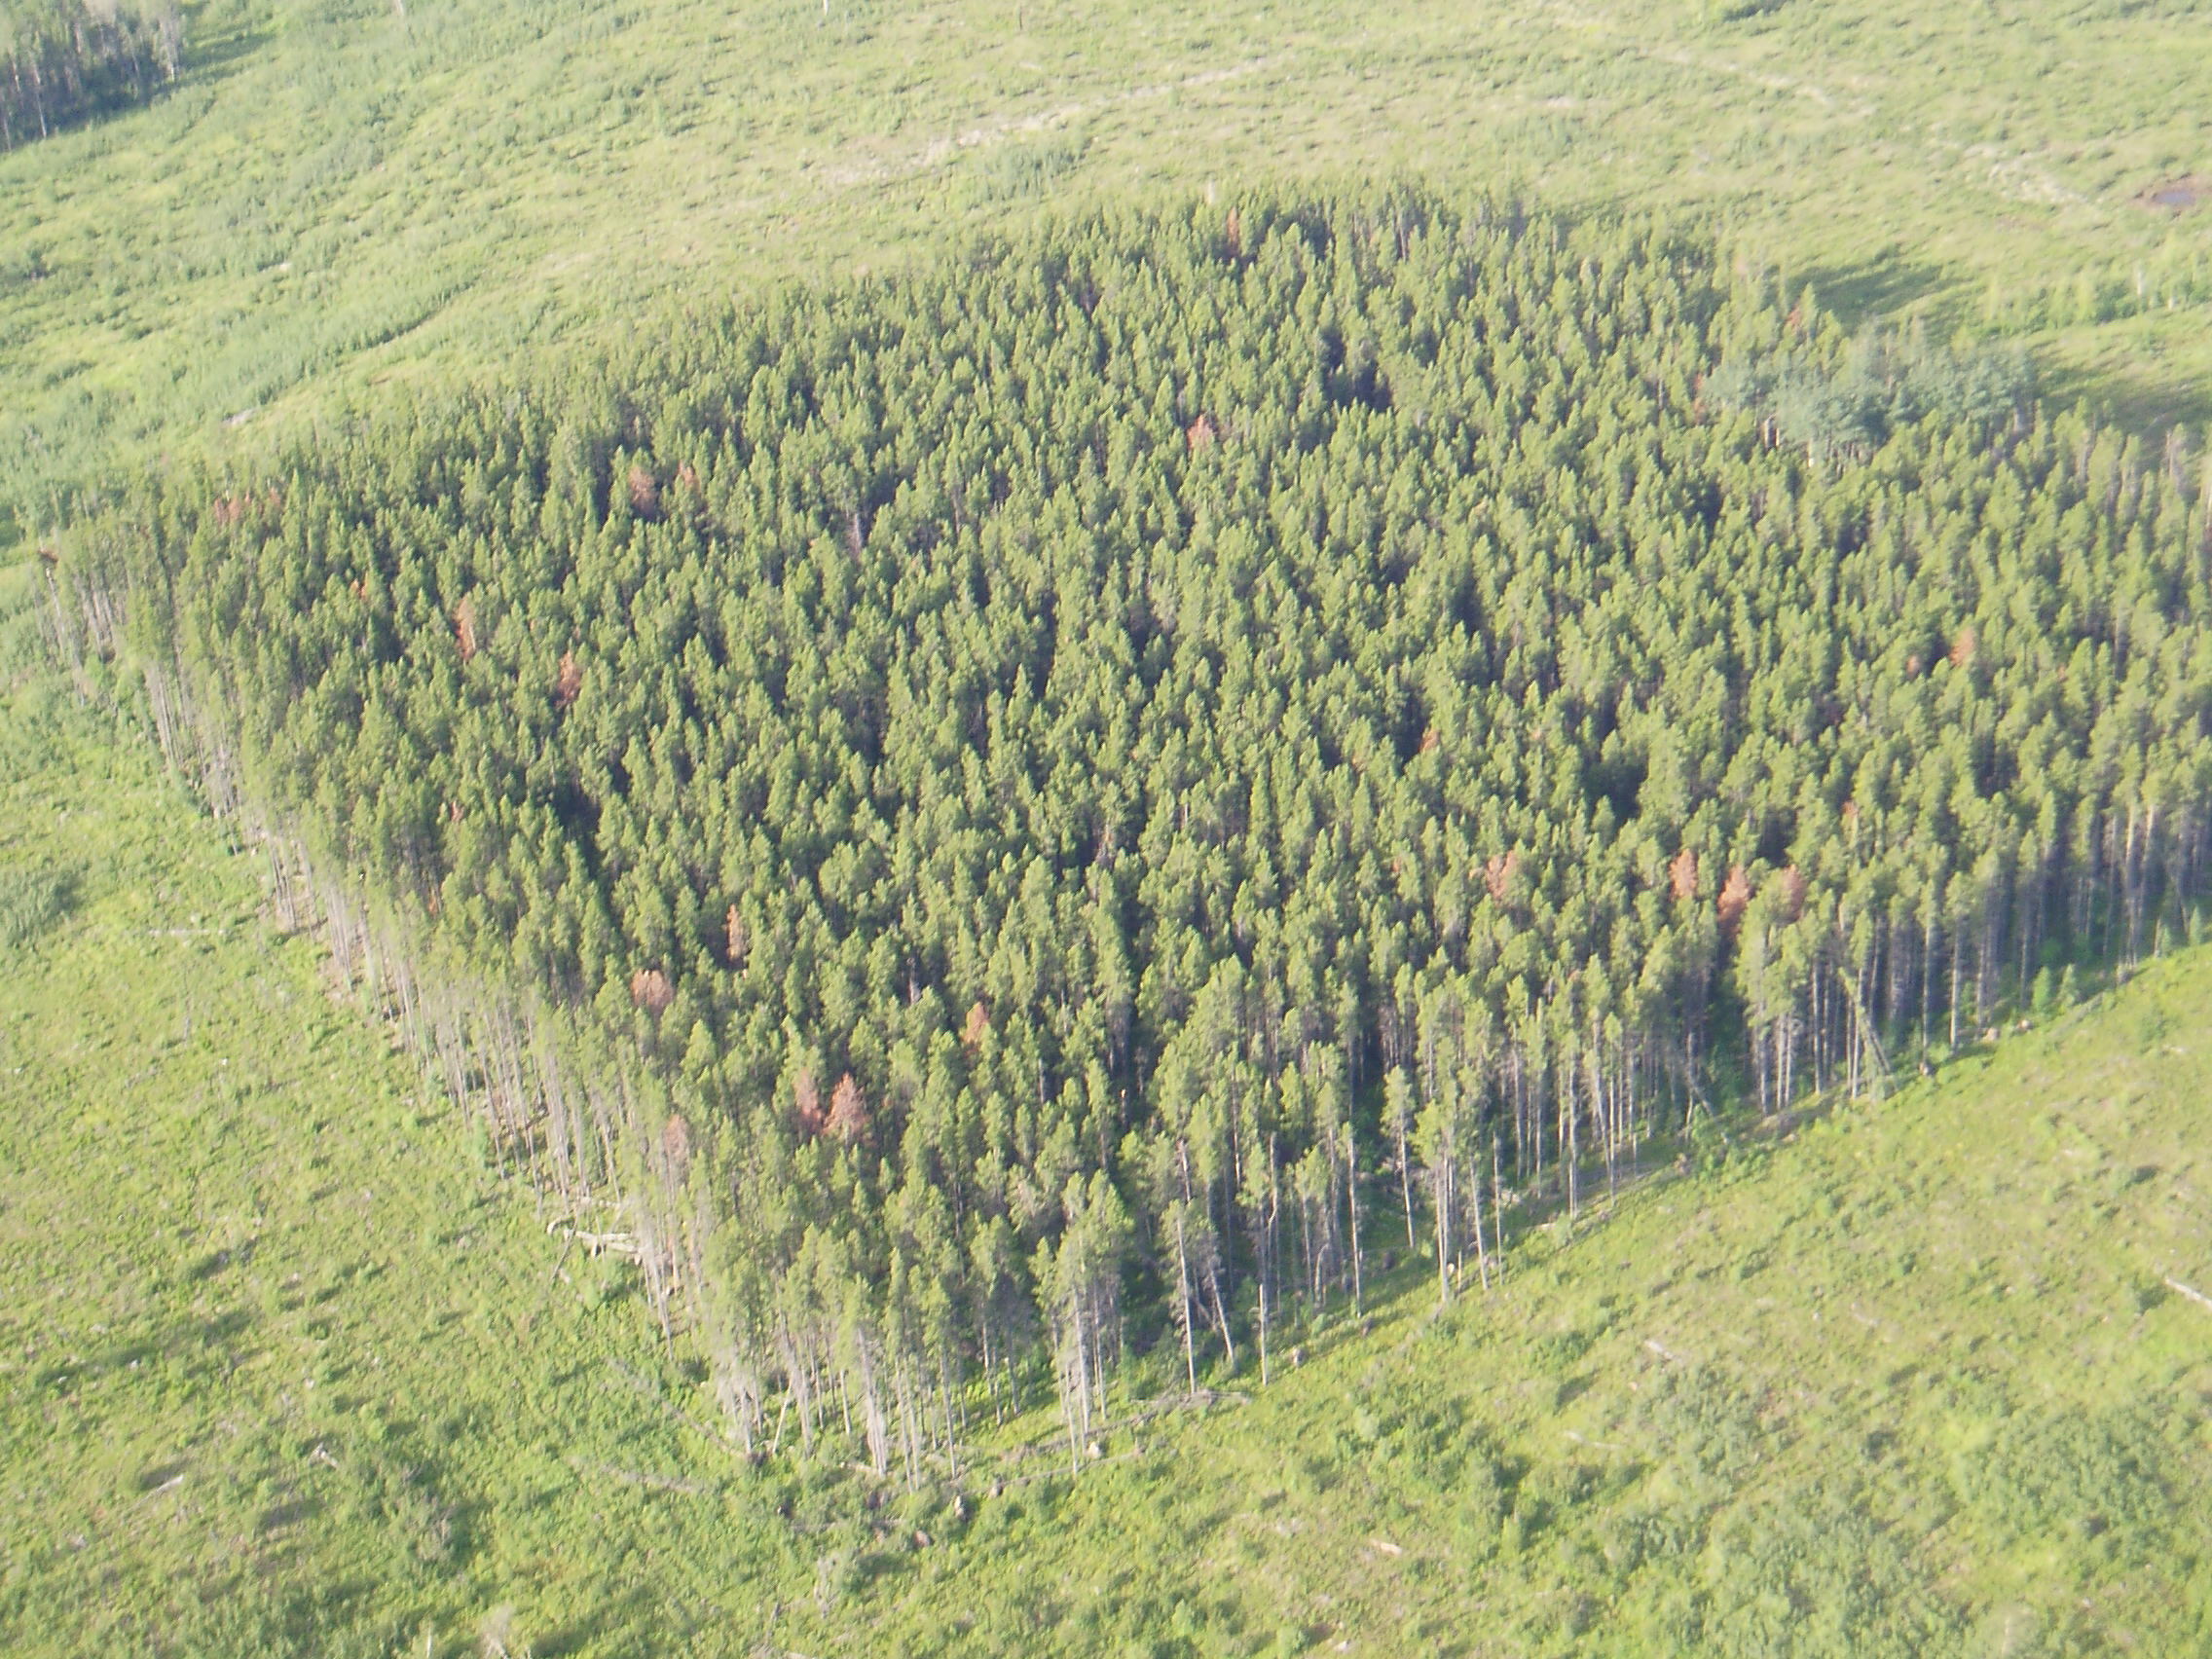 Stand Dynamics after Mountain Pine Beetle Attack